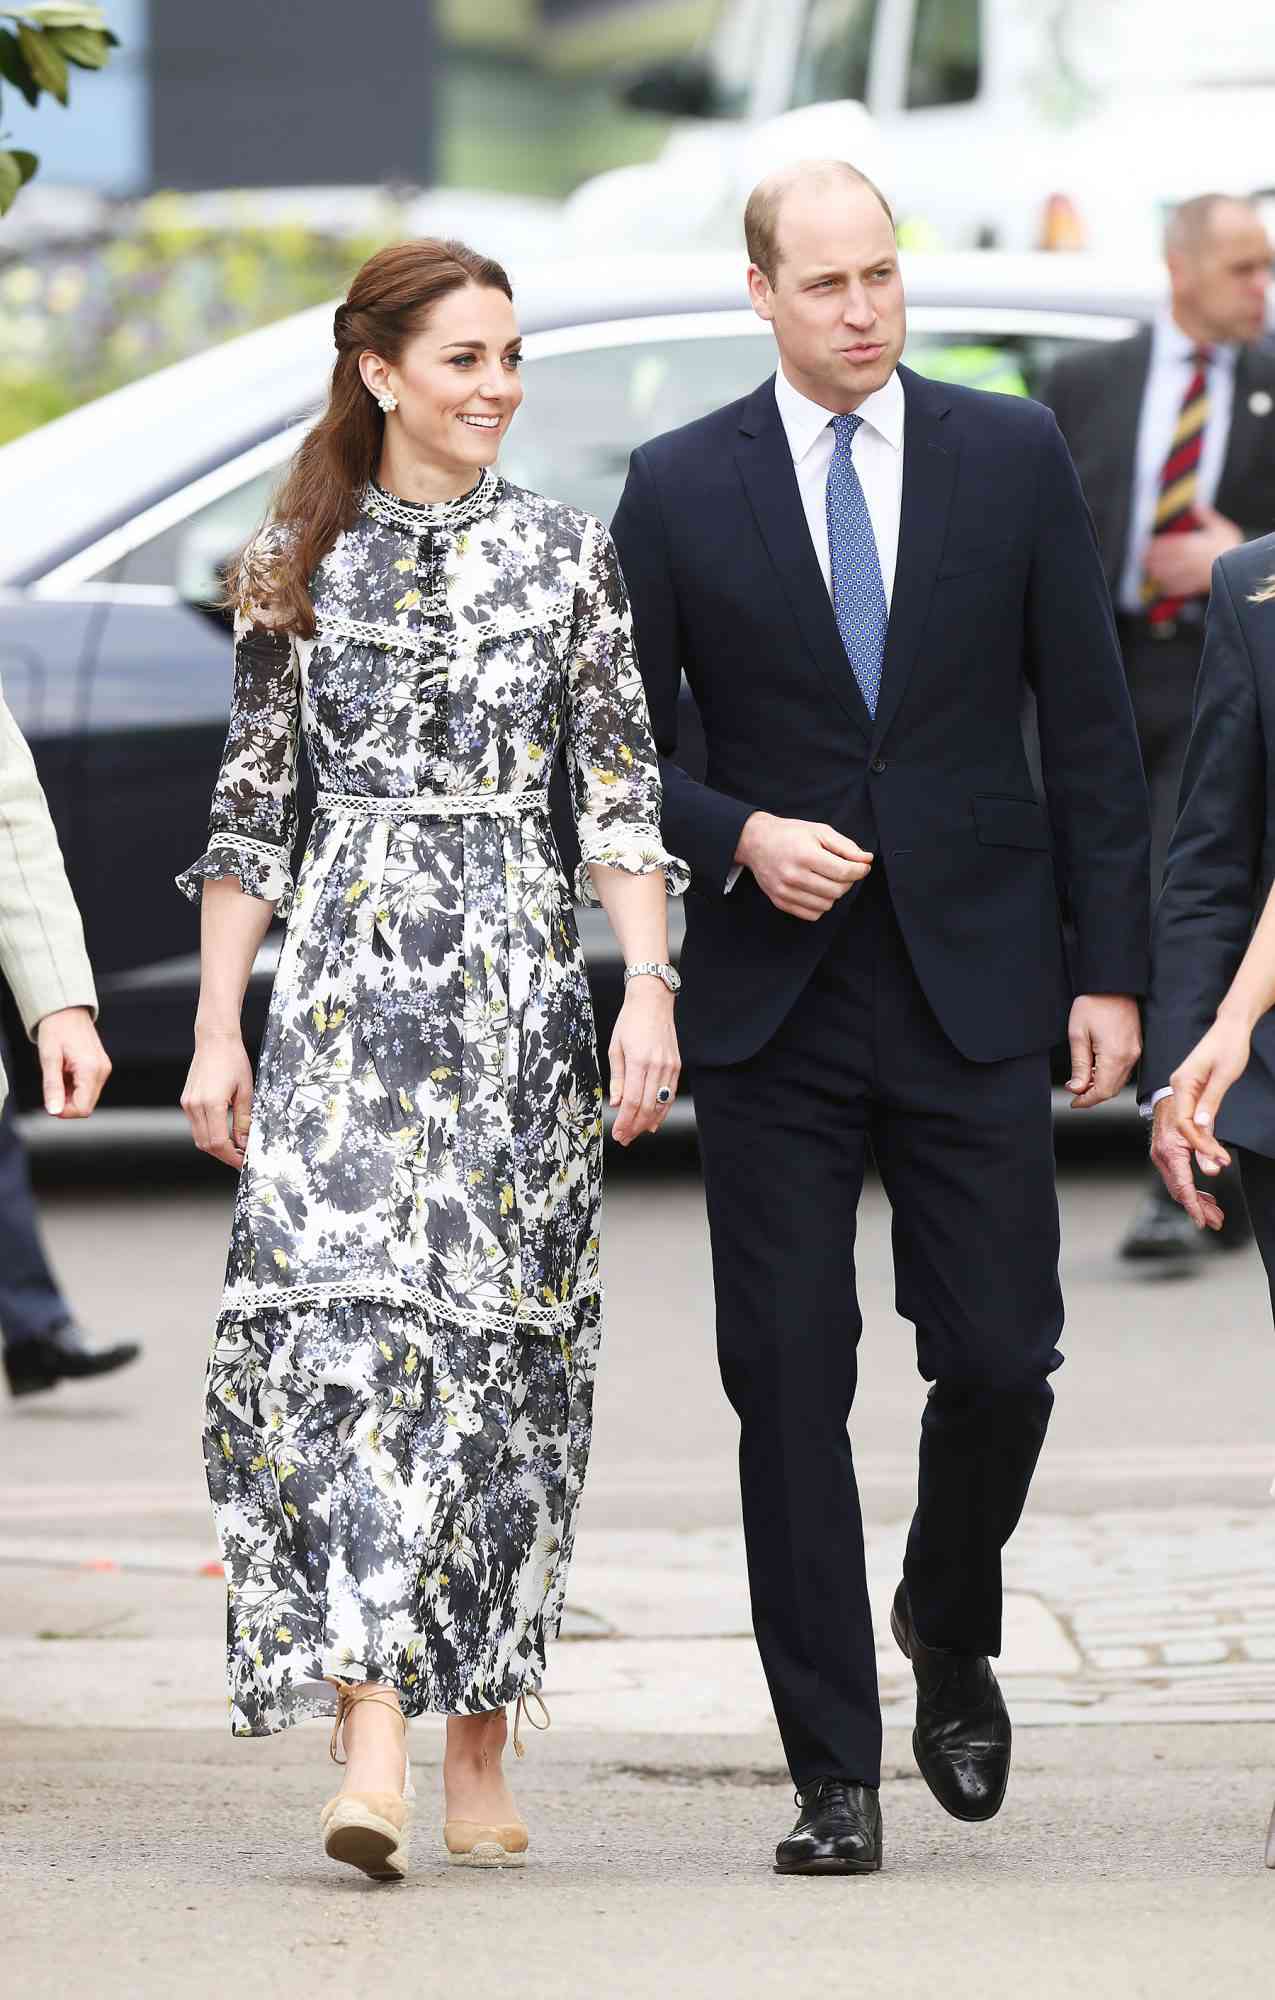 Prince William and Catherine, Duchess of Cambridge at the RHS Chelsea Flower Show 2019 press day at Chelsea Flower Show on May 20, 2019 in London, England